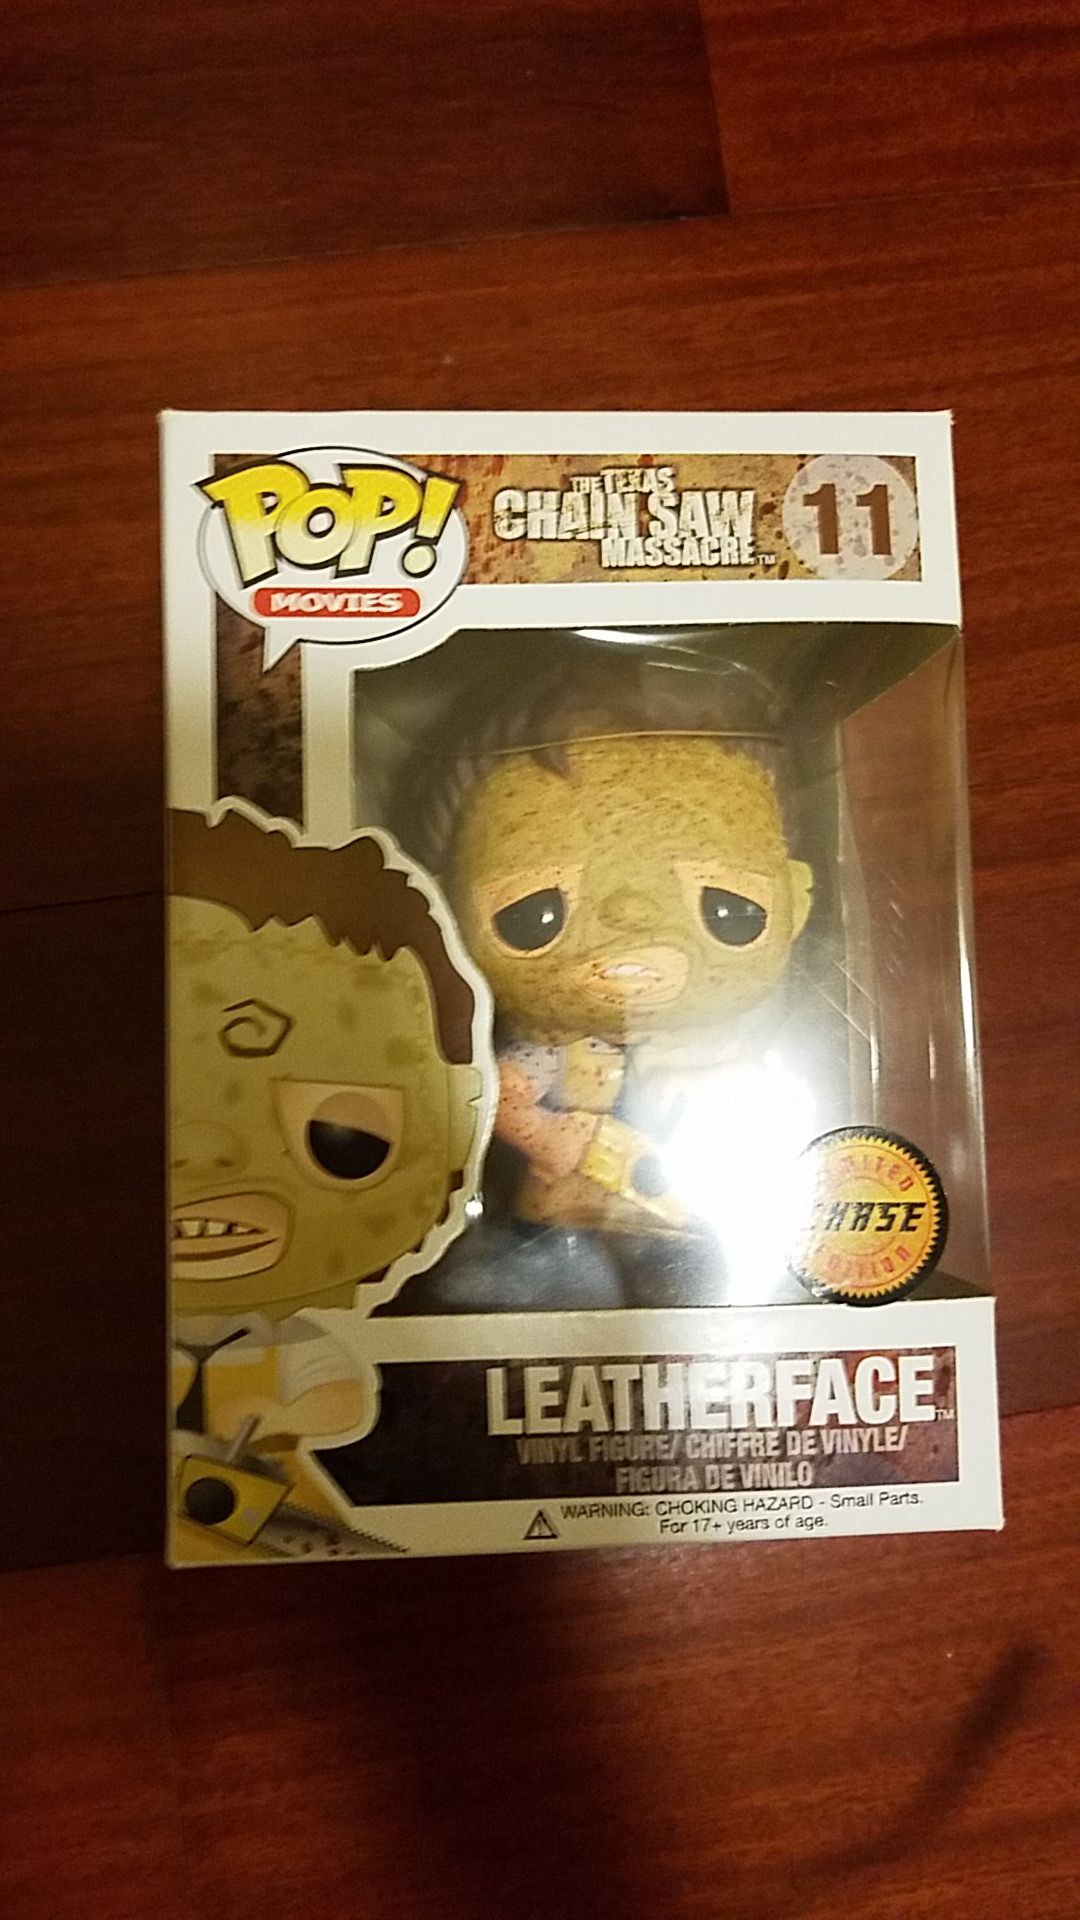 The Texas Chainsaw Leatherface Masscre